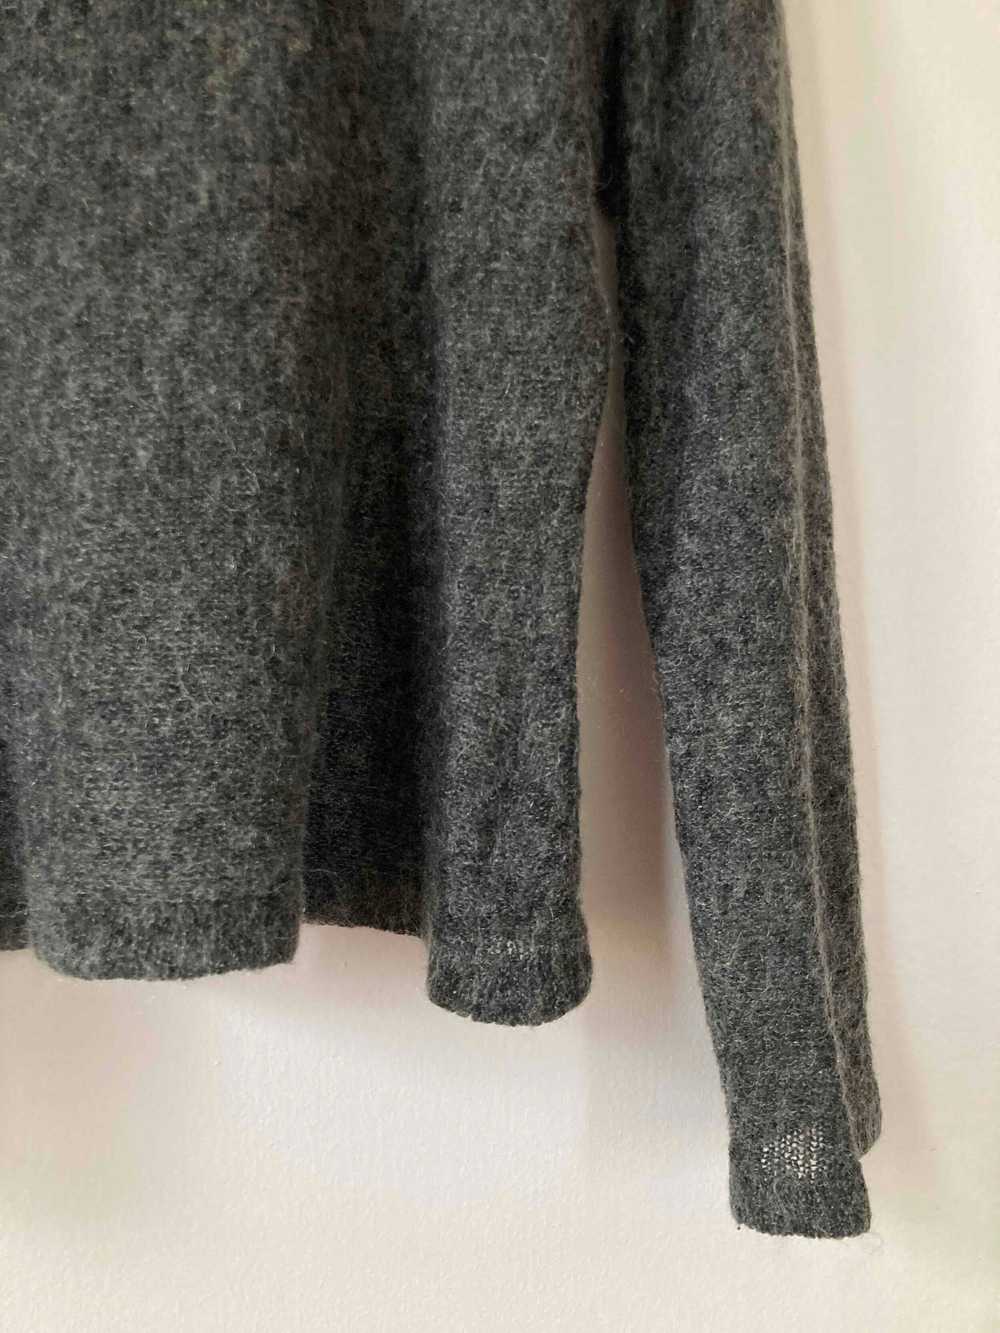 Mohair sweater - 90s mohair sweater Very fine and… - image 4